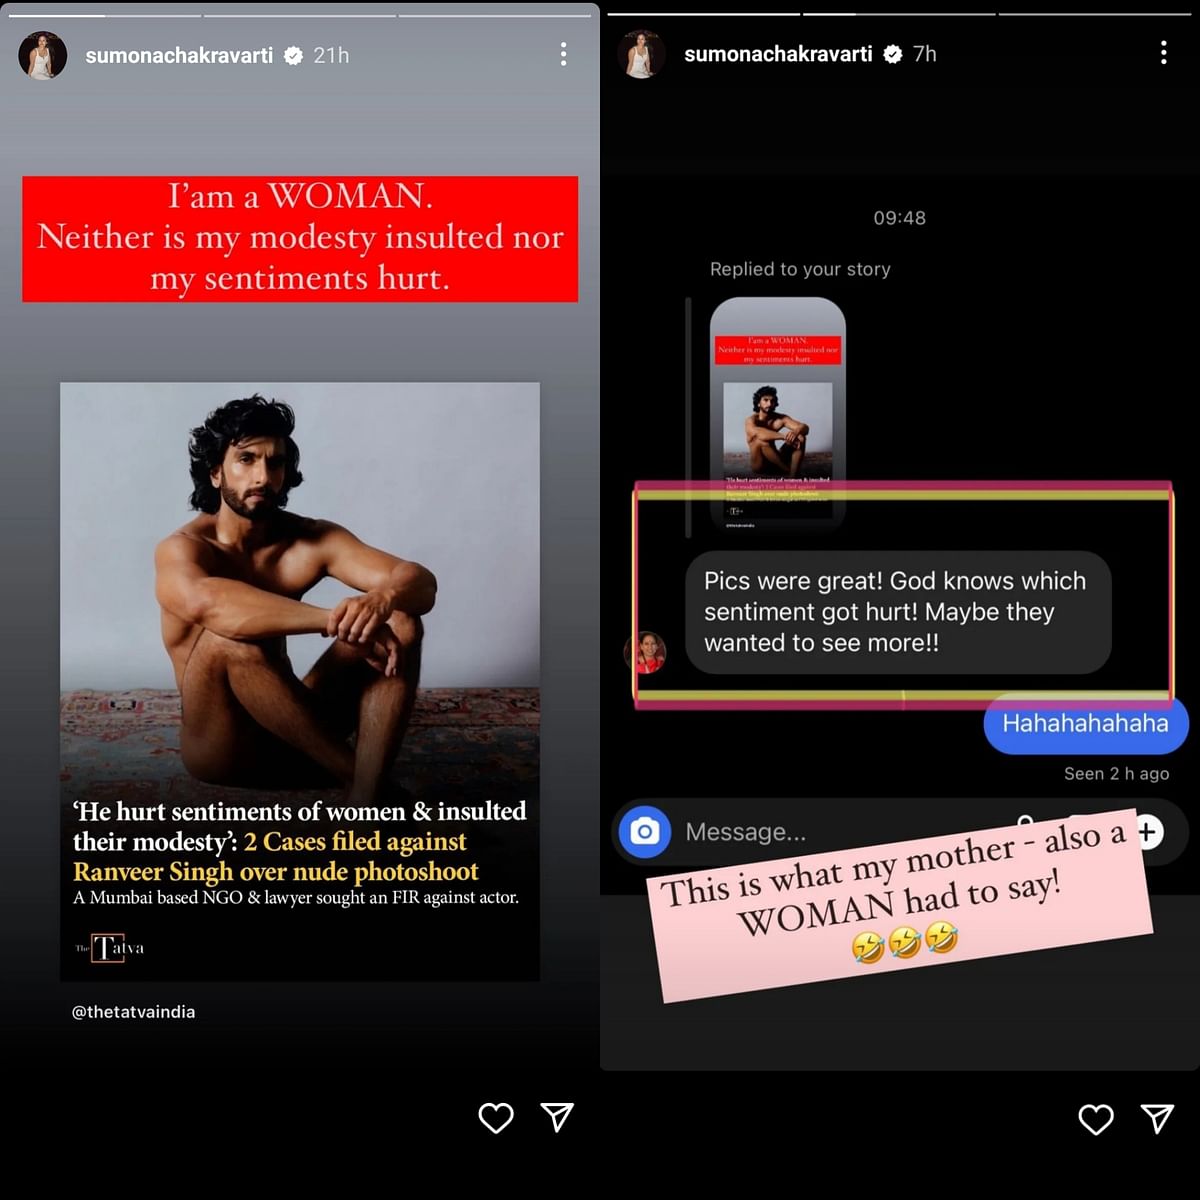 FIRs were lodged against Ranveer Singh after he posted photos from his nude shoot for a magazine on social media.